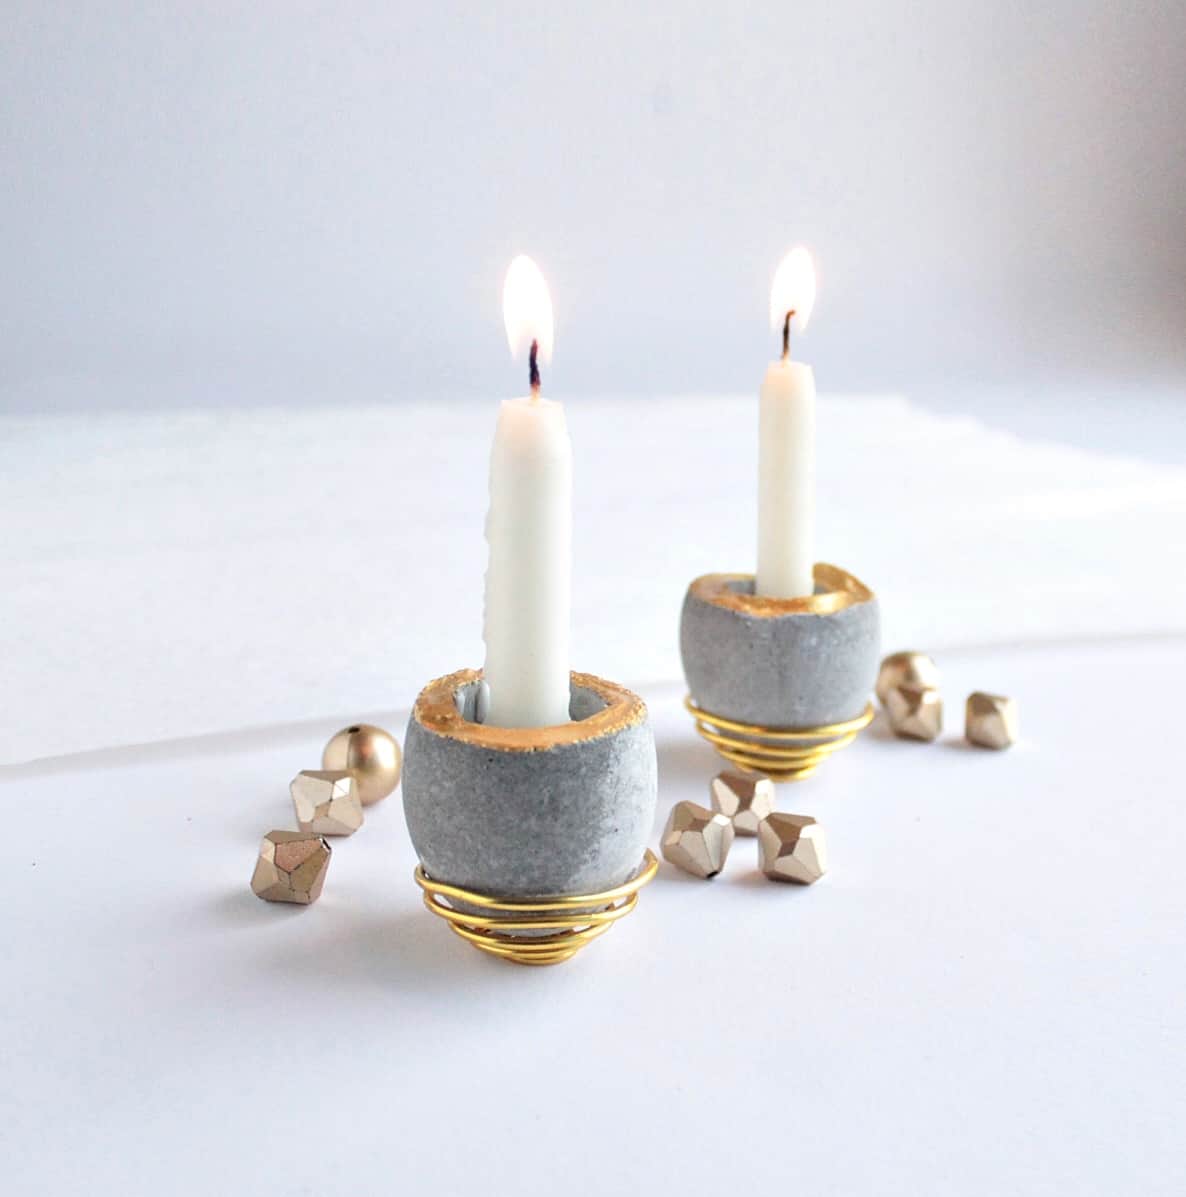 small cement candleholders with burning taper candles